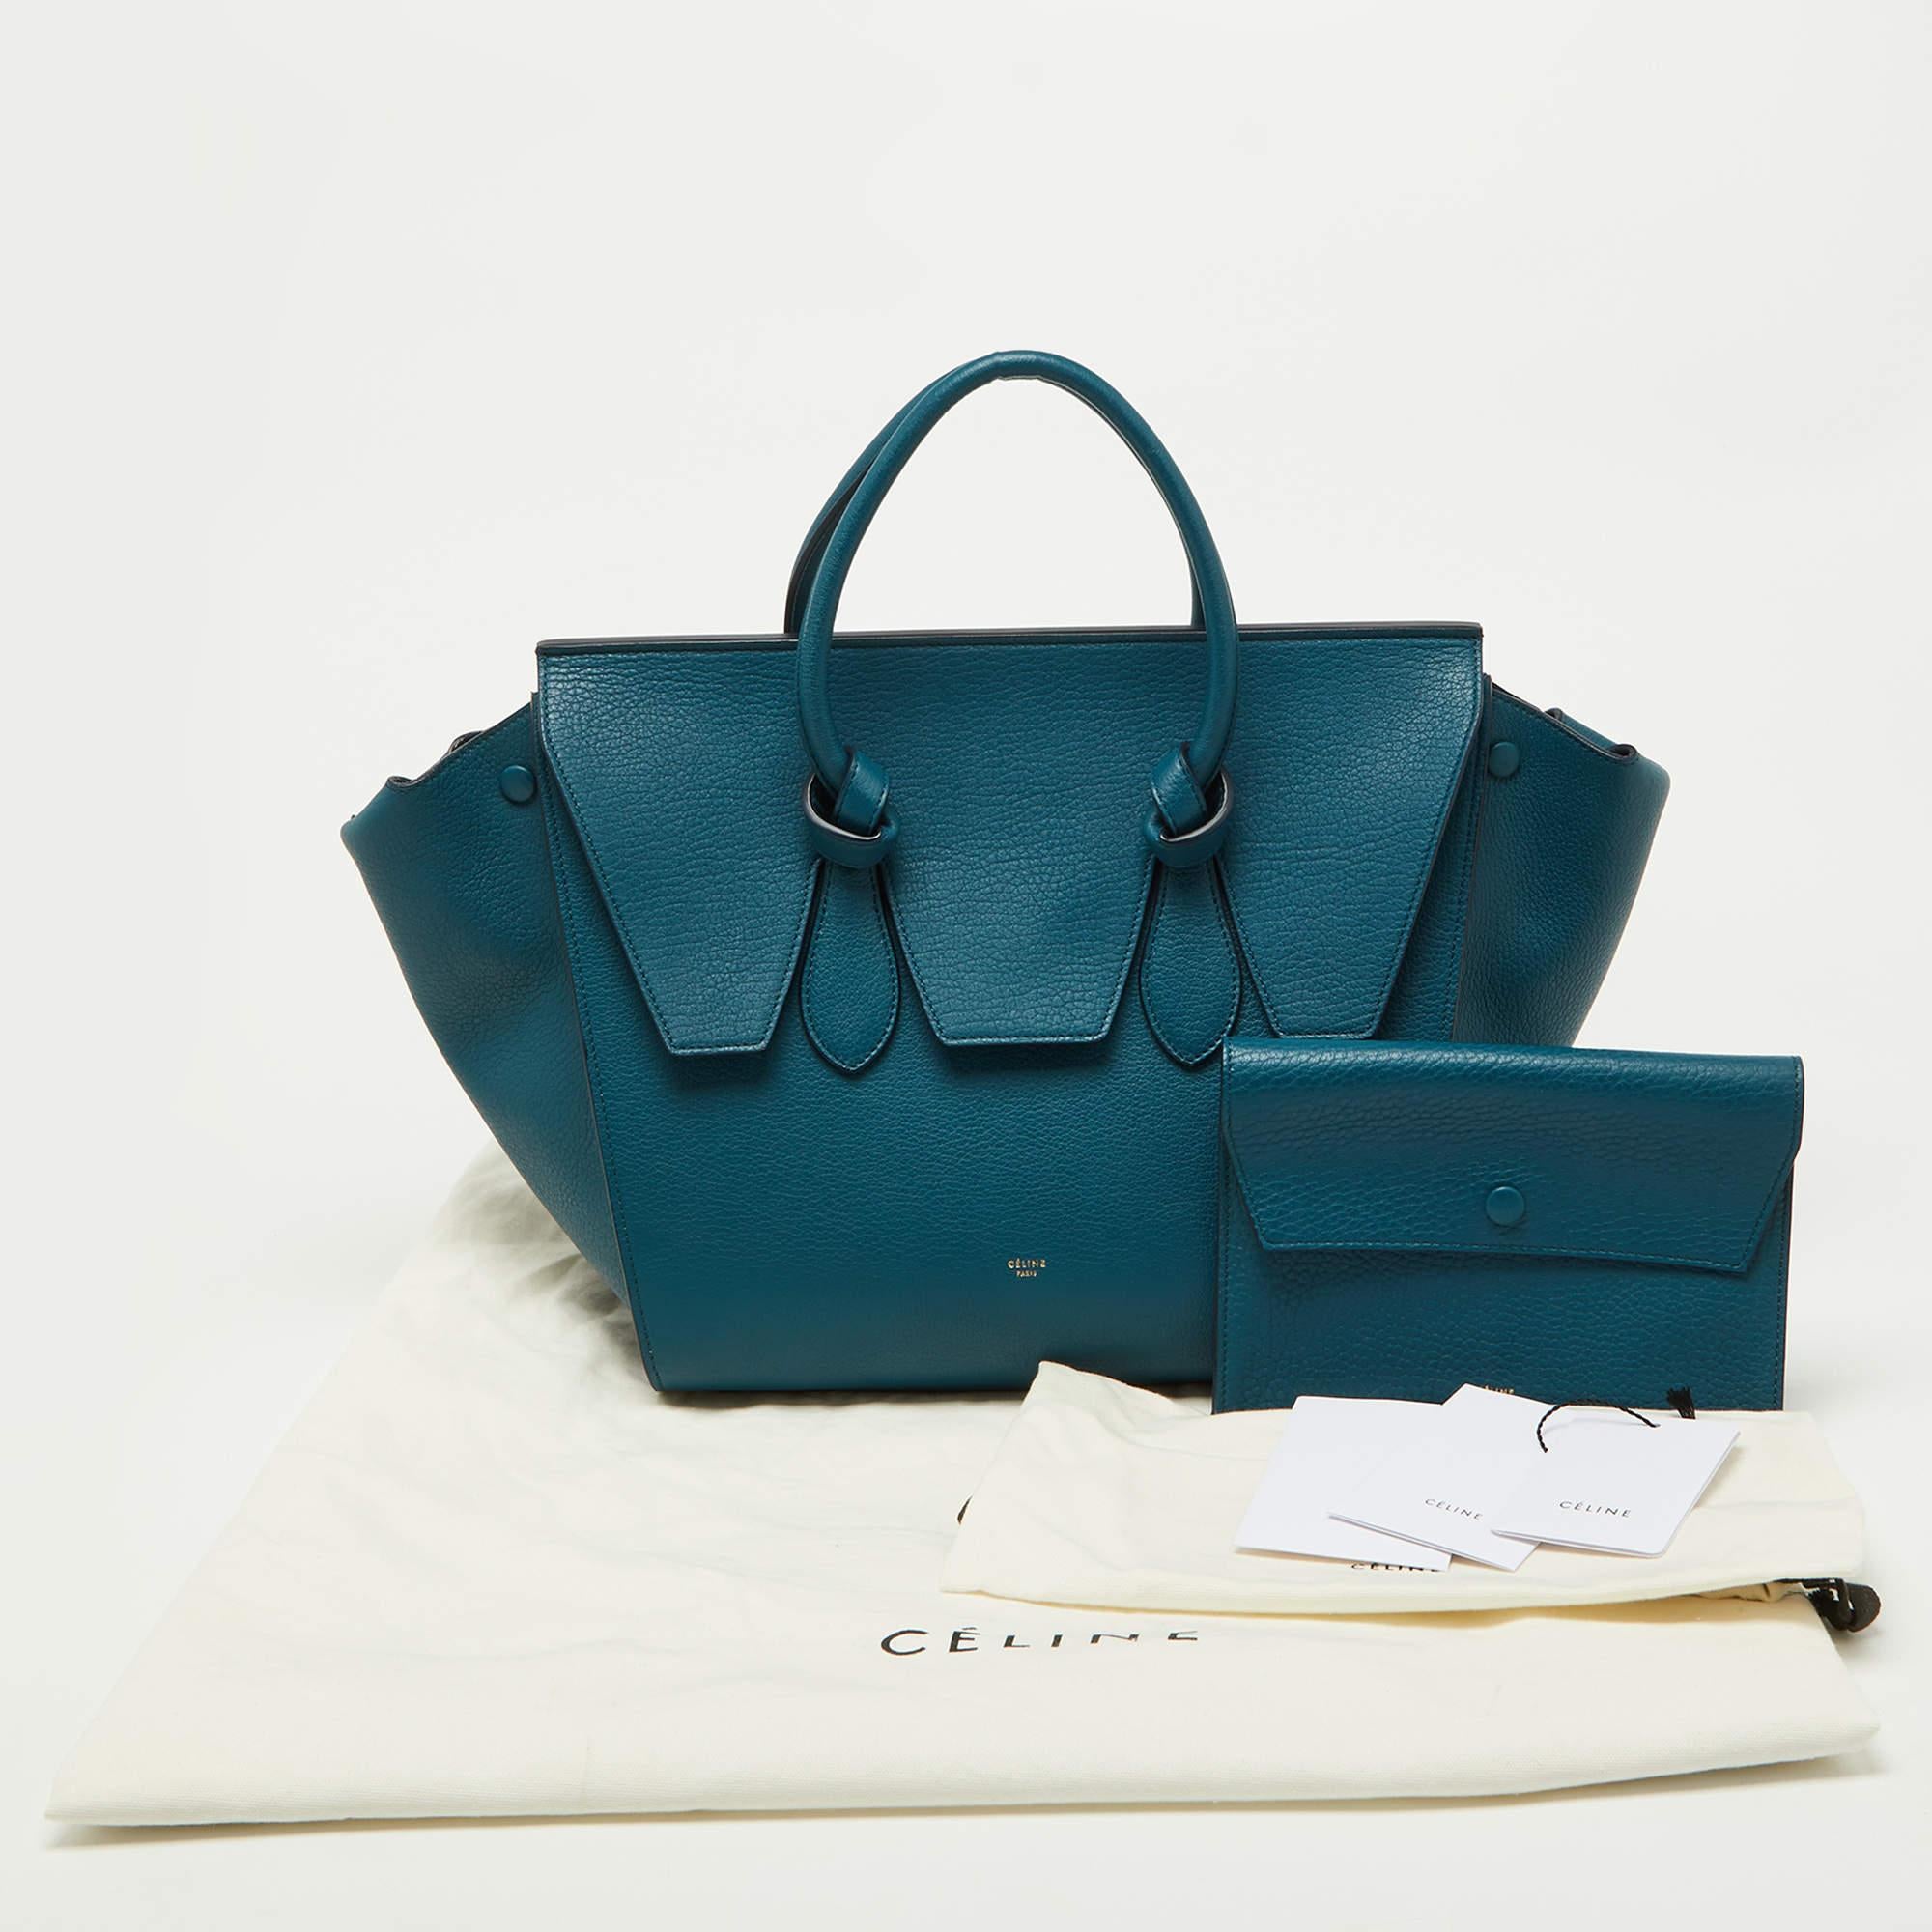 Celine Teal Blue Leather Small Tie Tote For Sale 9